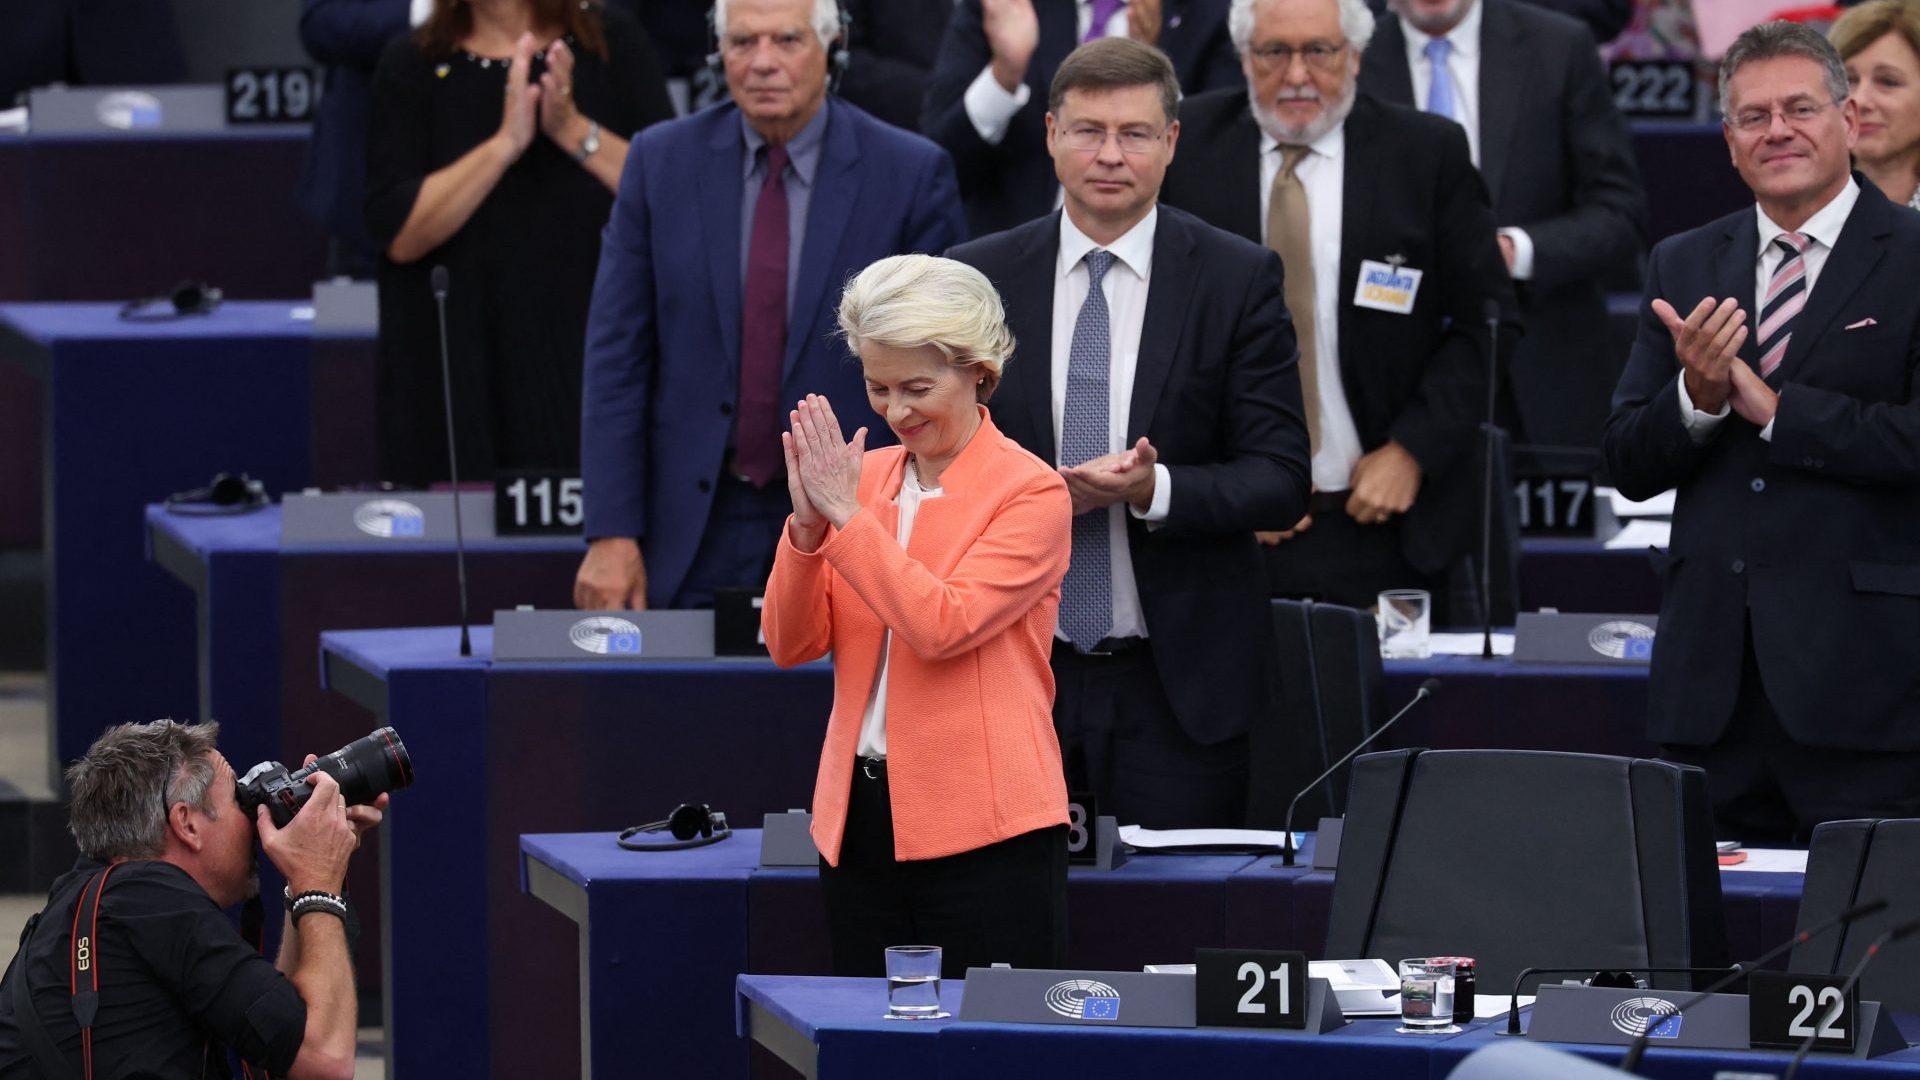 EU Commission President Ursula von der Leyen is applauded after giving her annual State of the Union address during a plenary session at the European Parliament in Strasbourg. Photo: FREDERICK FLORIN/AFP via Getty Images